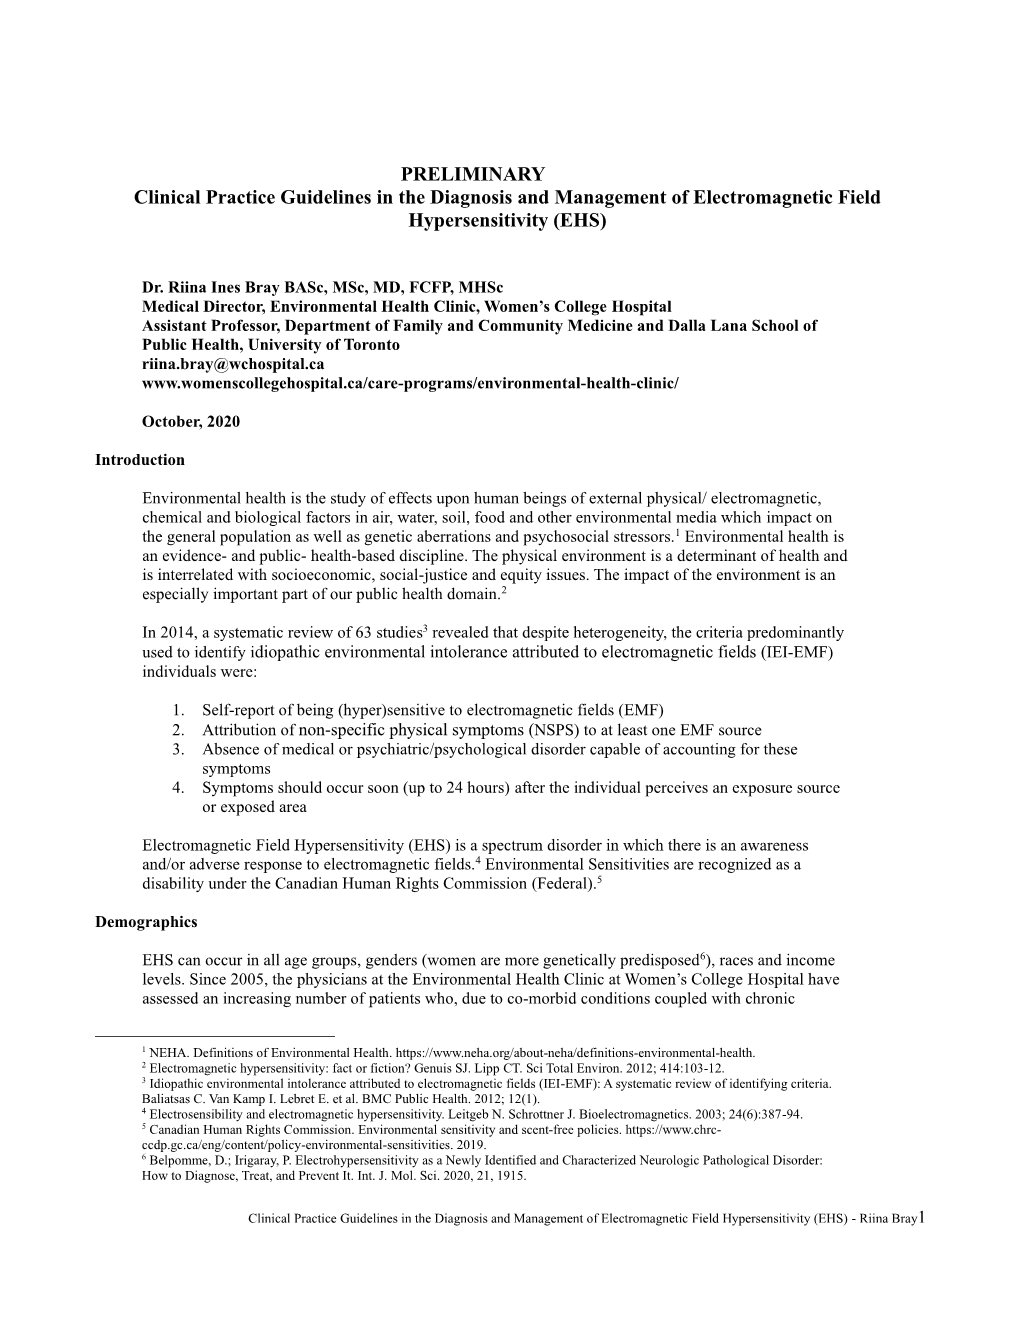 PRELIMINARY Clinical Practice Guidelines in the Diagnosis and Management of Electromagnetic Field Hypersensitivity (EHS)